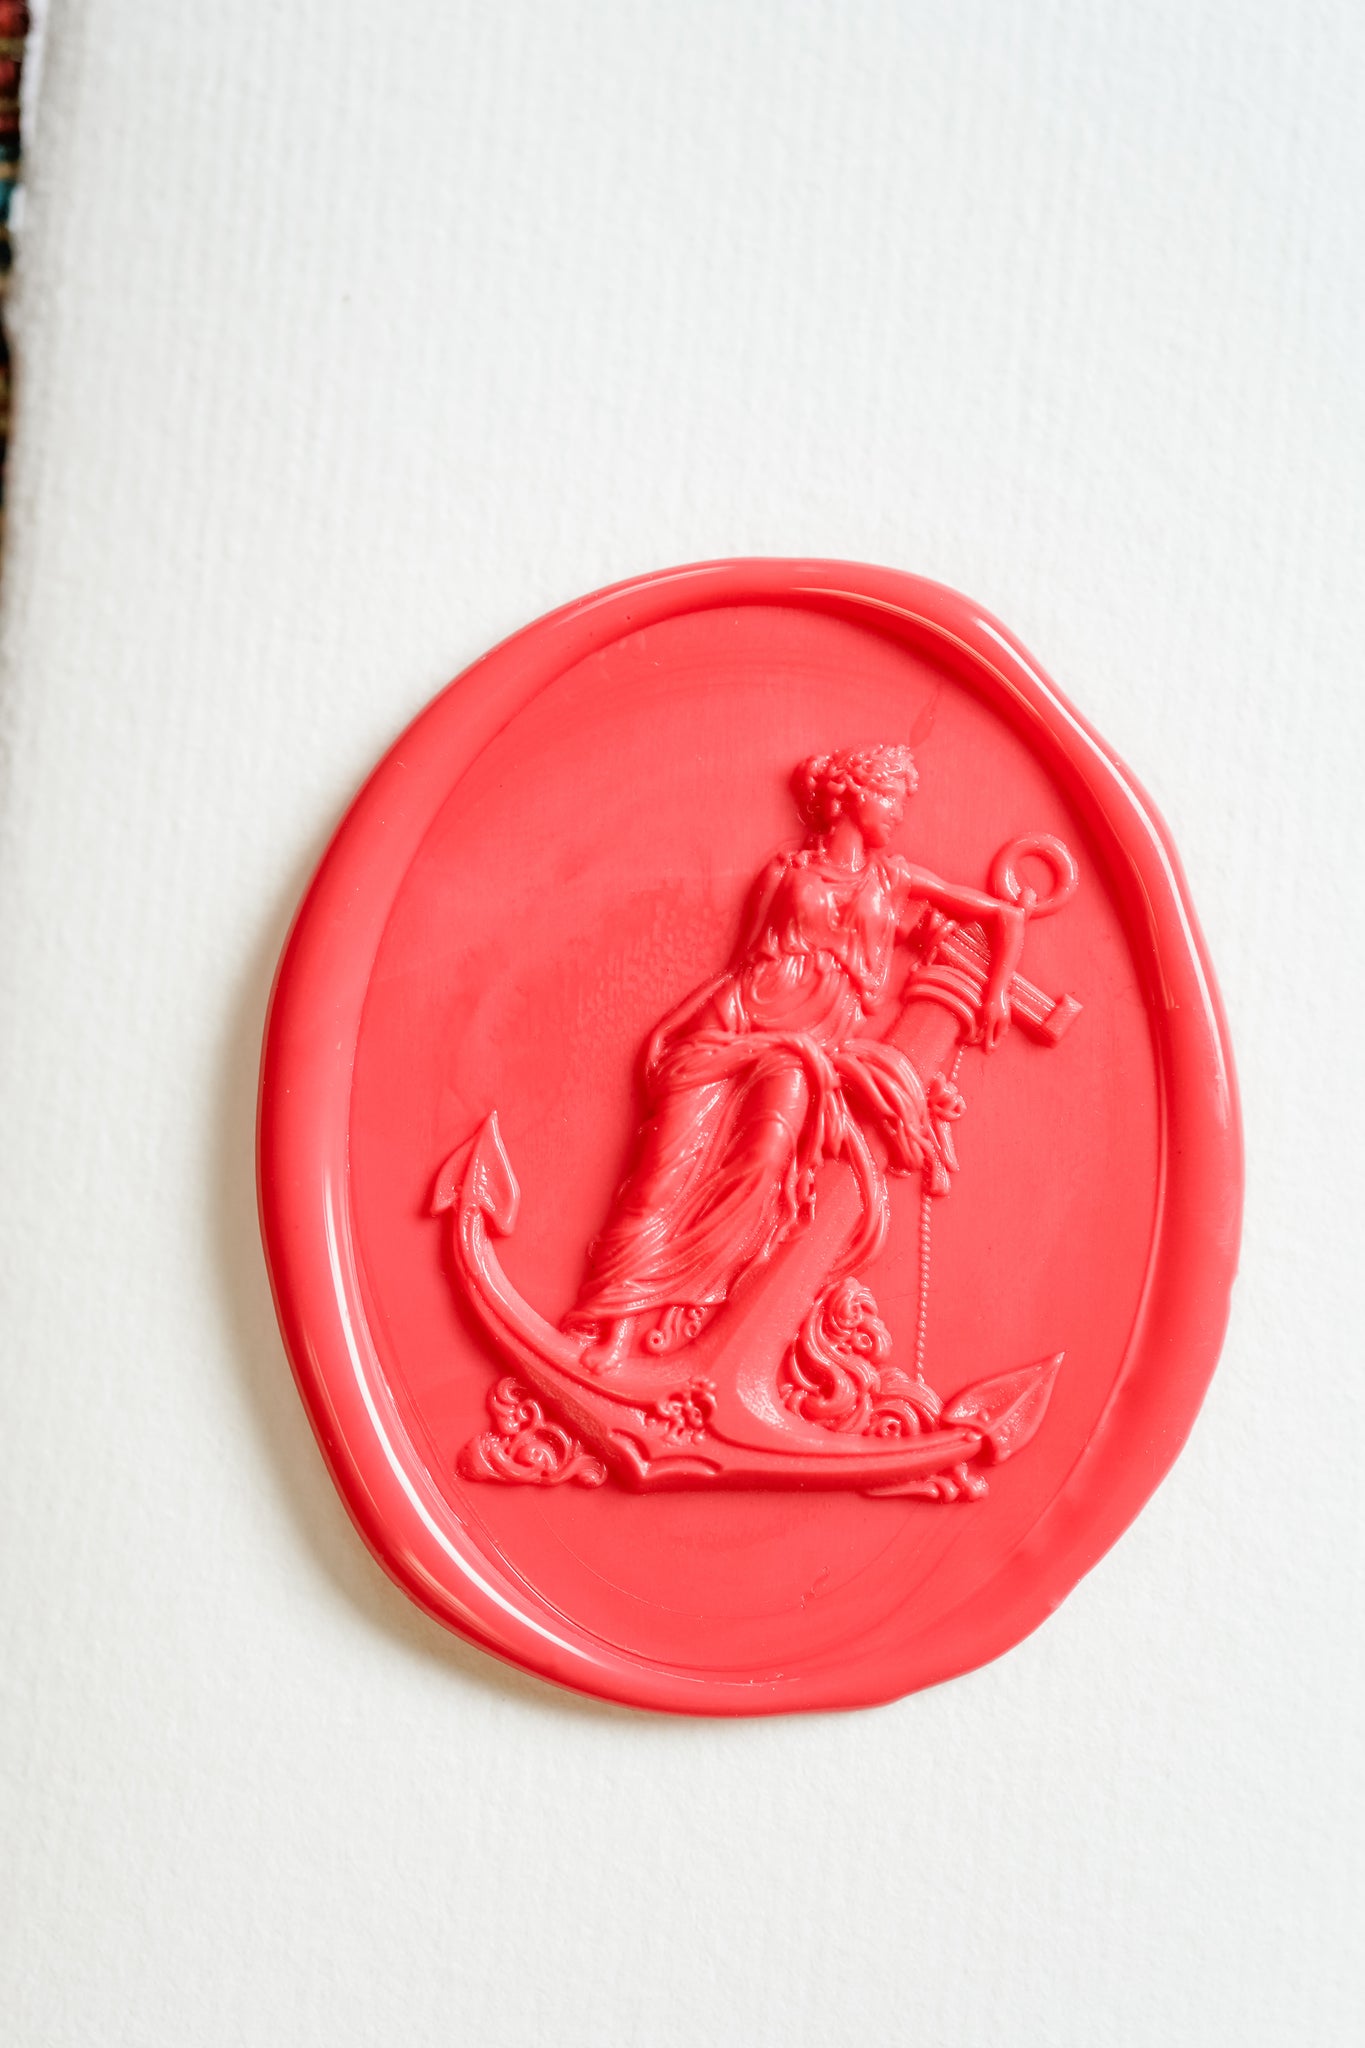 Allegory of Hope Seal Collector’s Seal